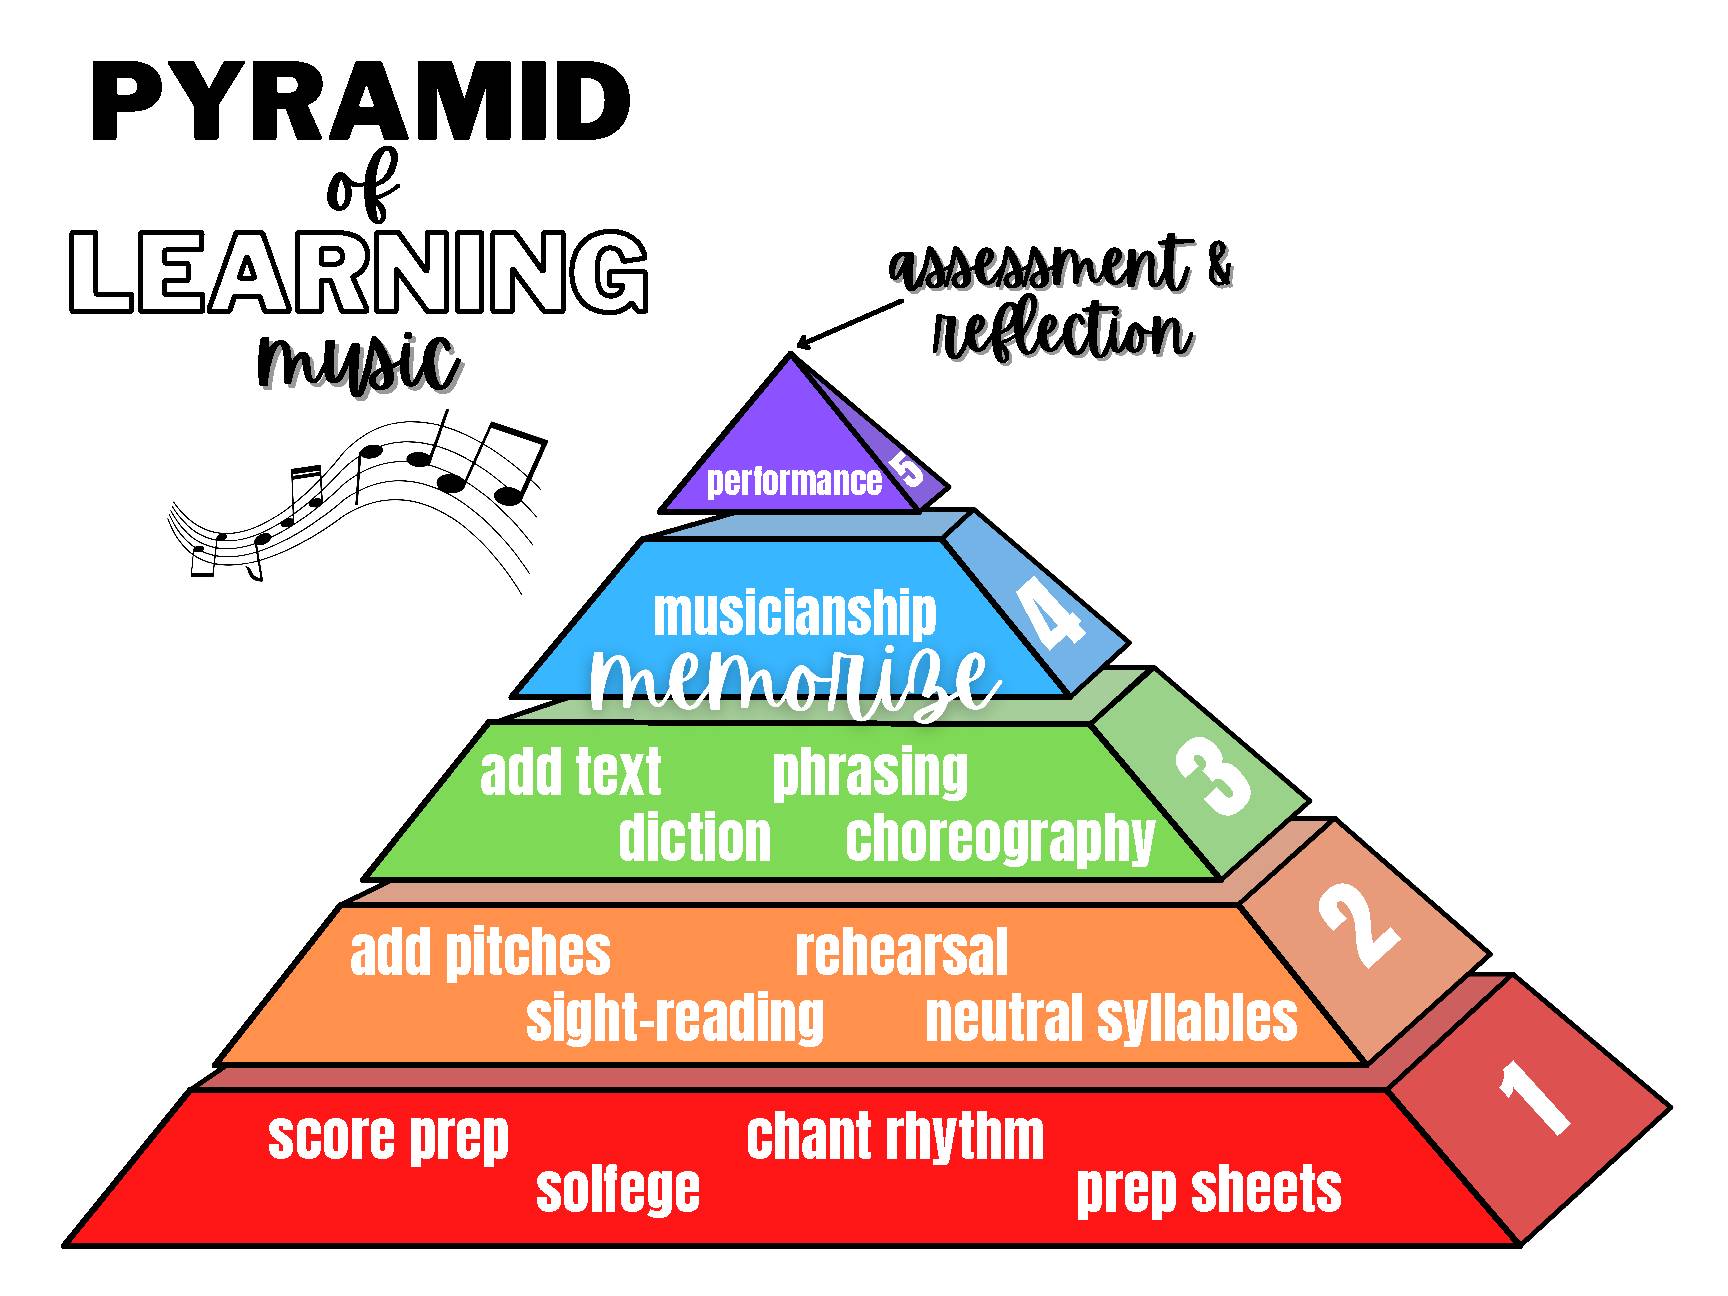 Pyramid of Learning Music Poster's featured image